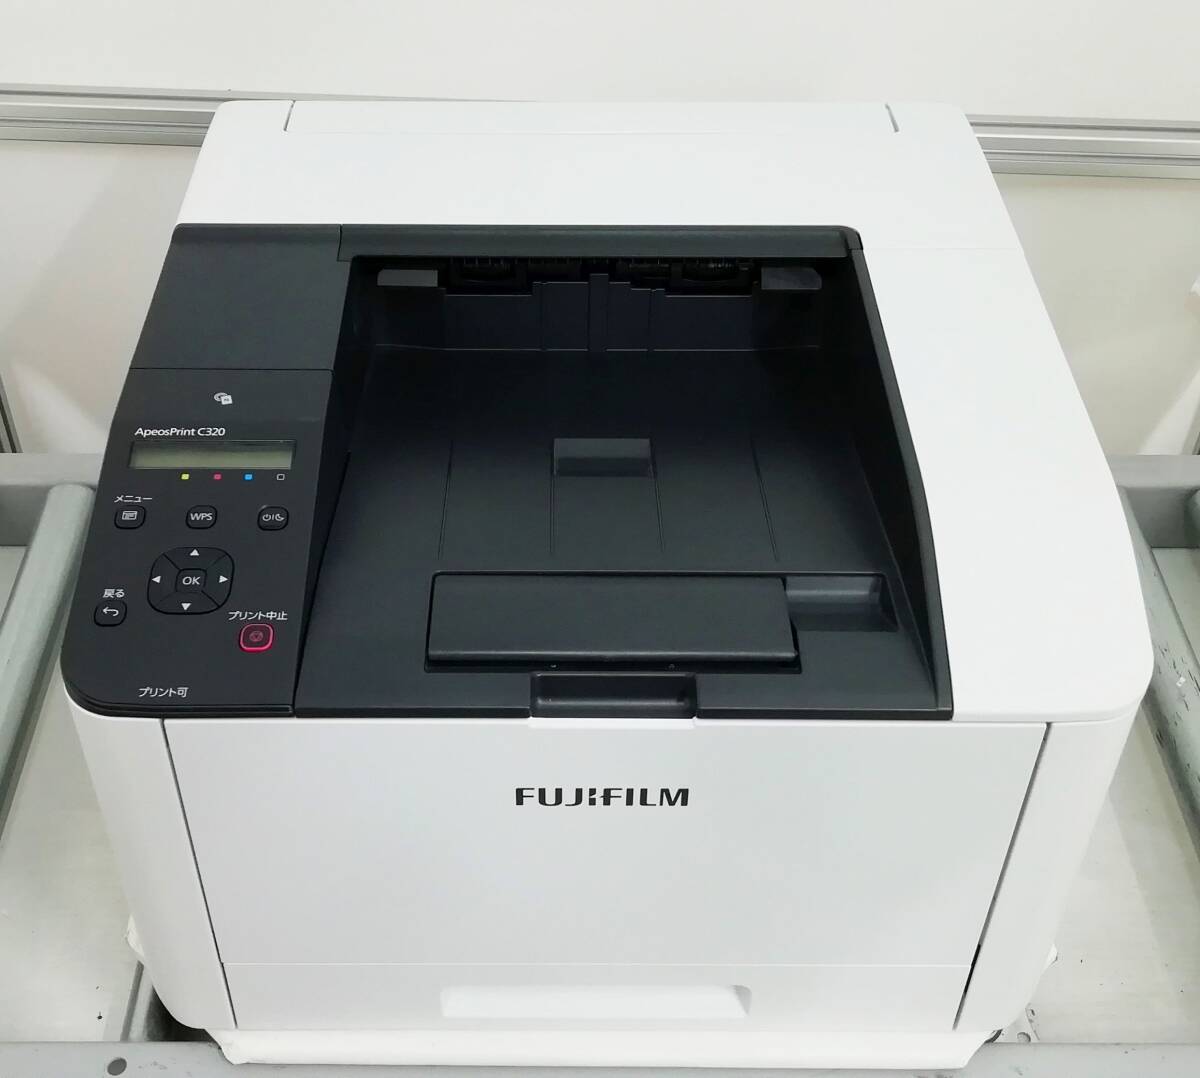  used FUJIFILM A4 color laser printer -ApeosPrint C320 dw printing sheets number :16912 sheets monochrome printing blur have used toner attaching [H24040914]